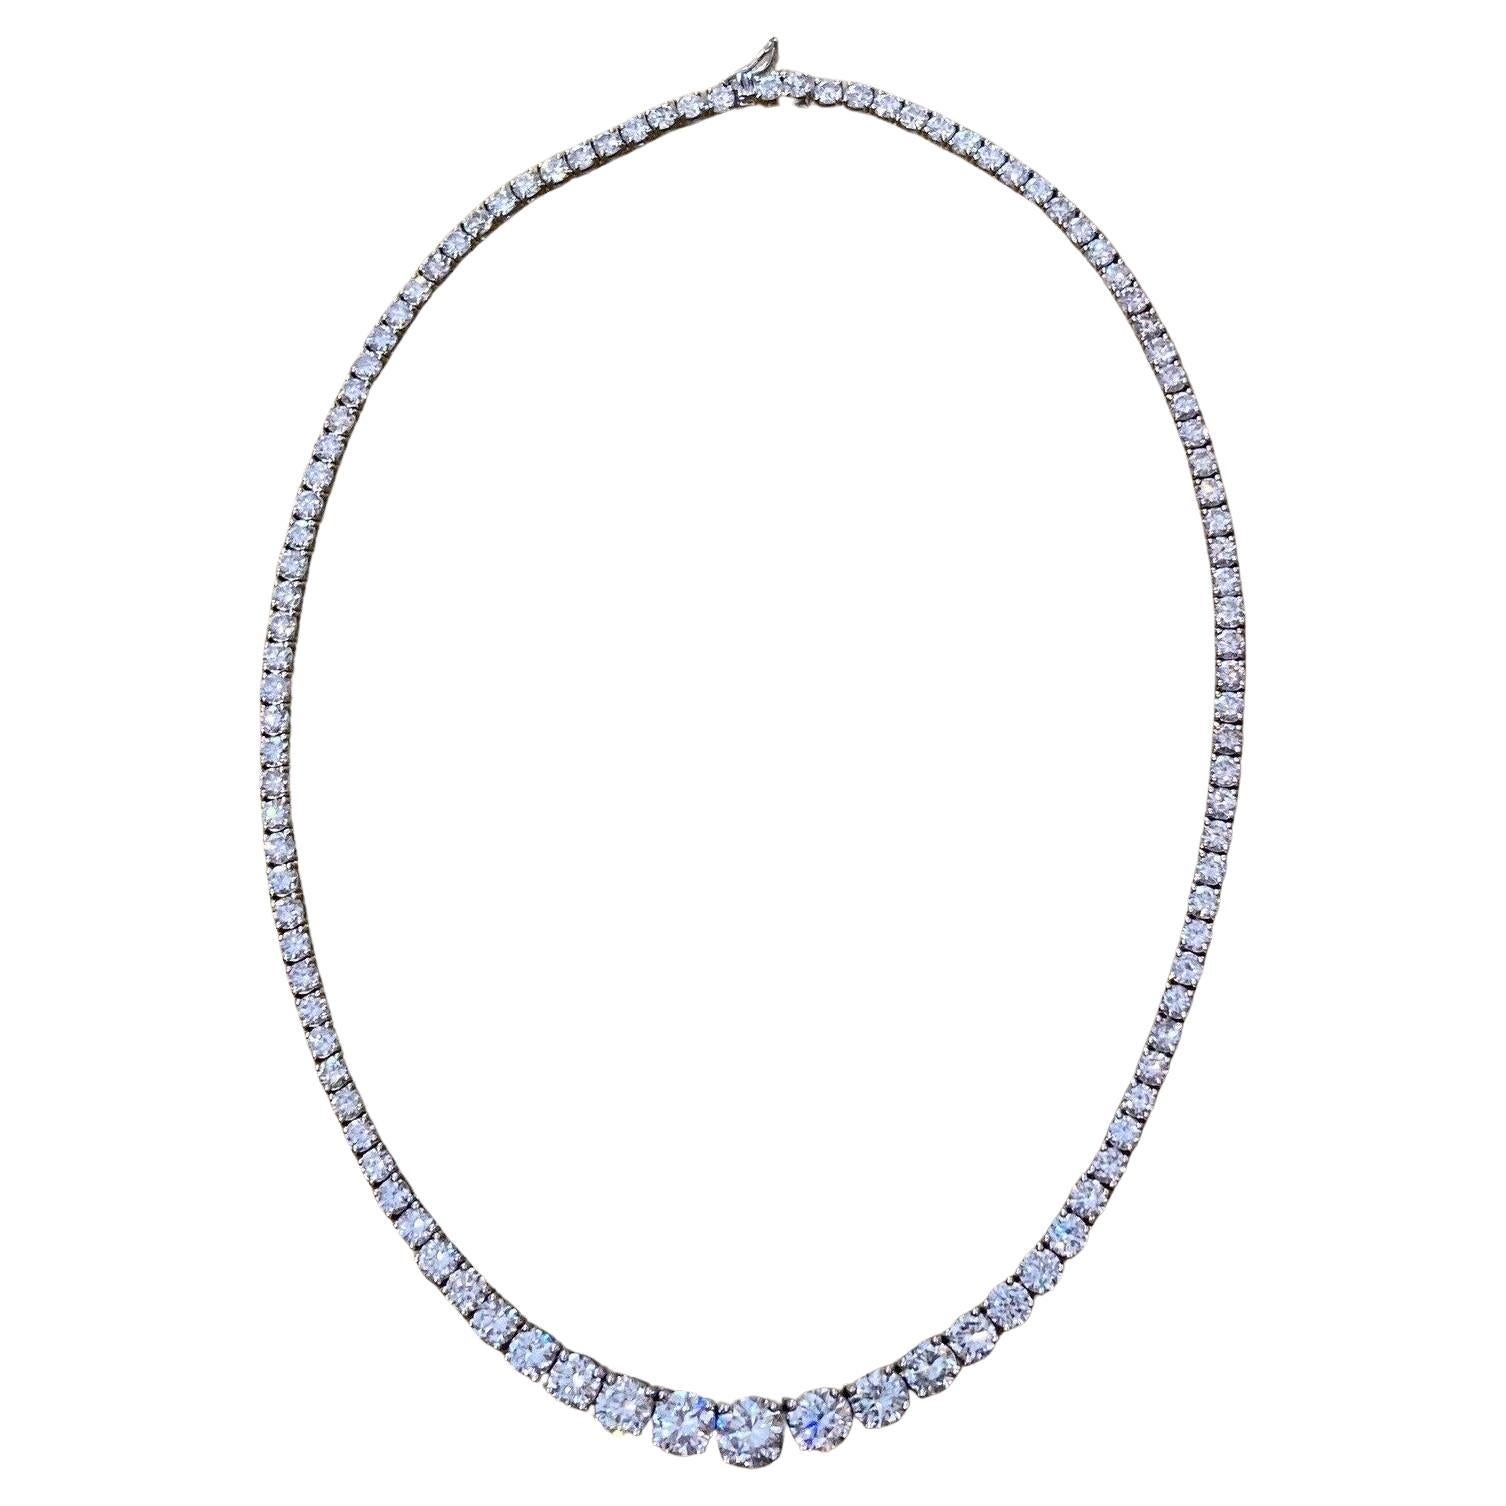 Diamond Riviera Necklace 24.12 Carat Total in 4-prong 18k White Gold setting